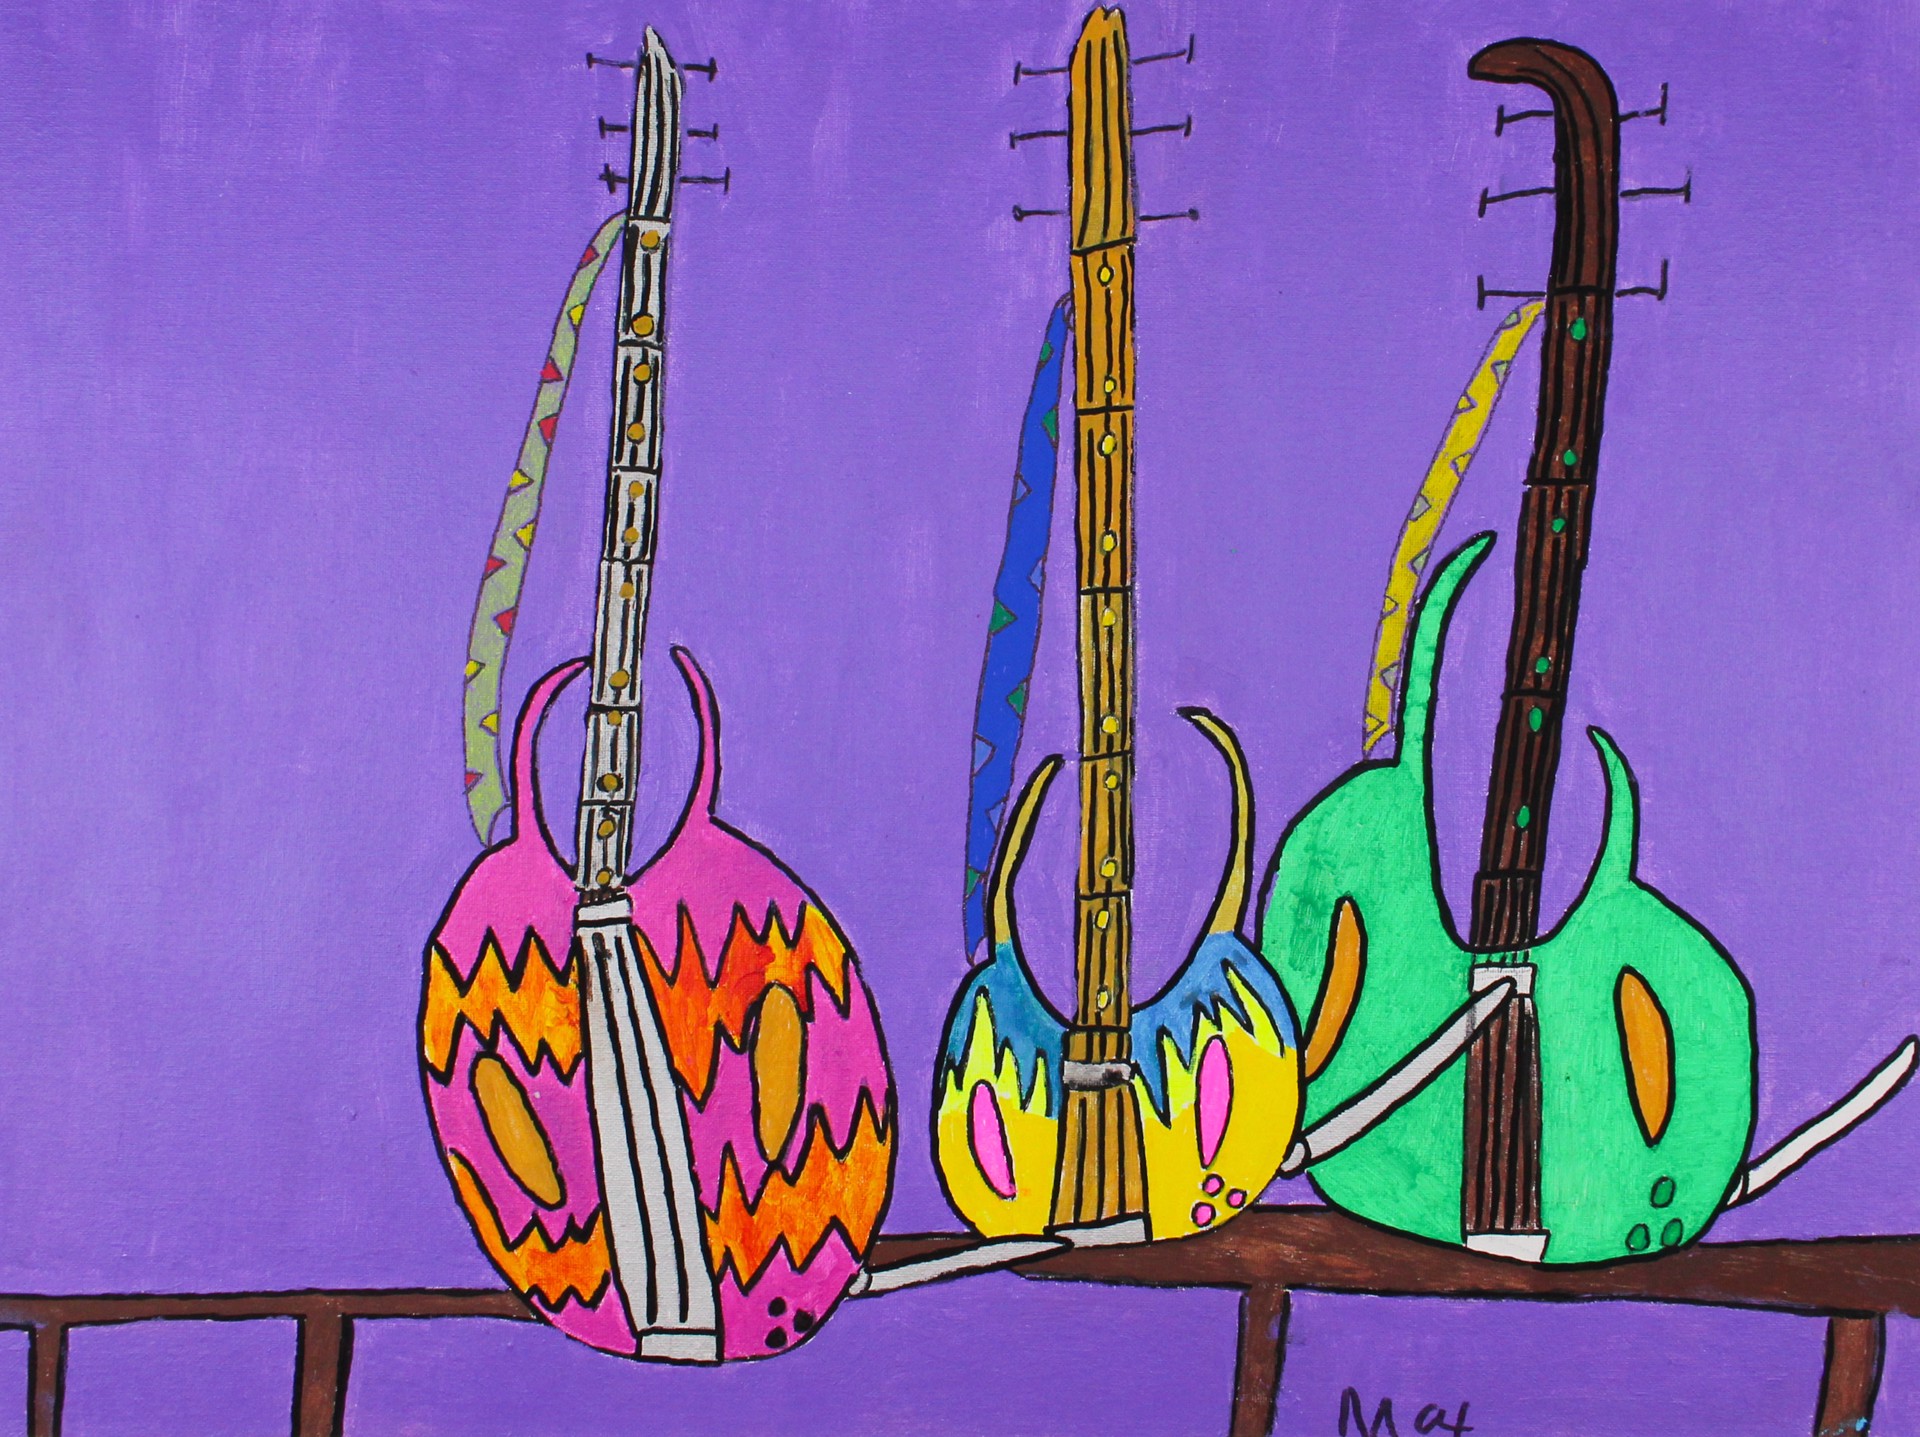 Guitars in the Show by Max Poznerzon